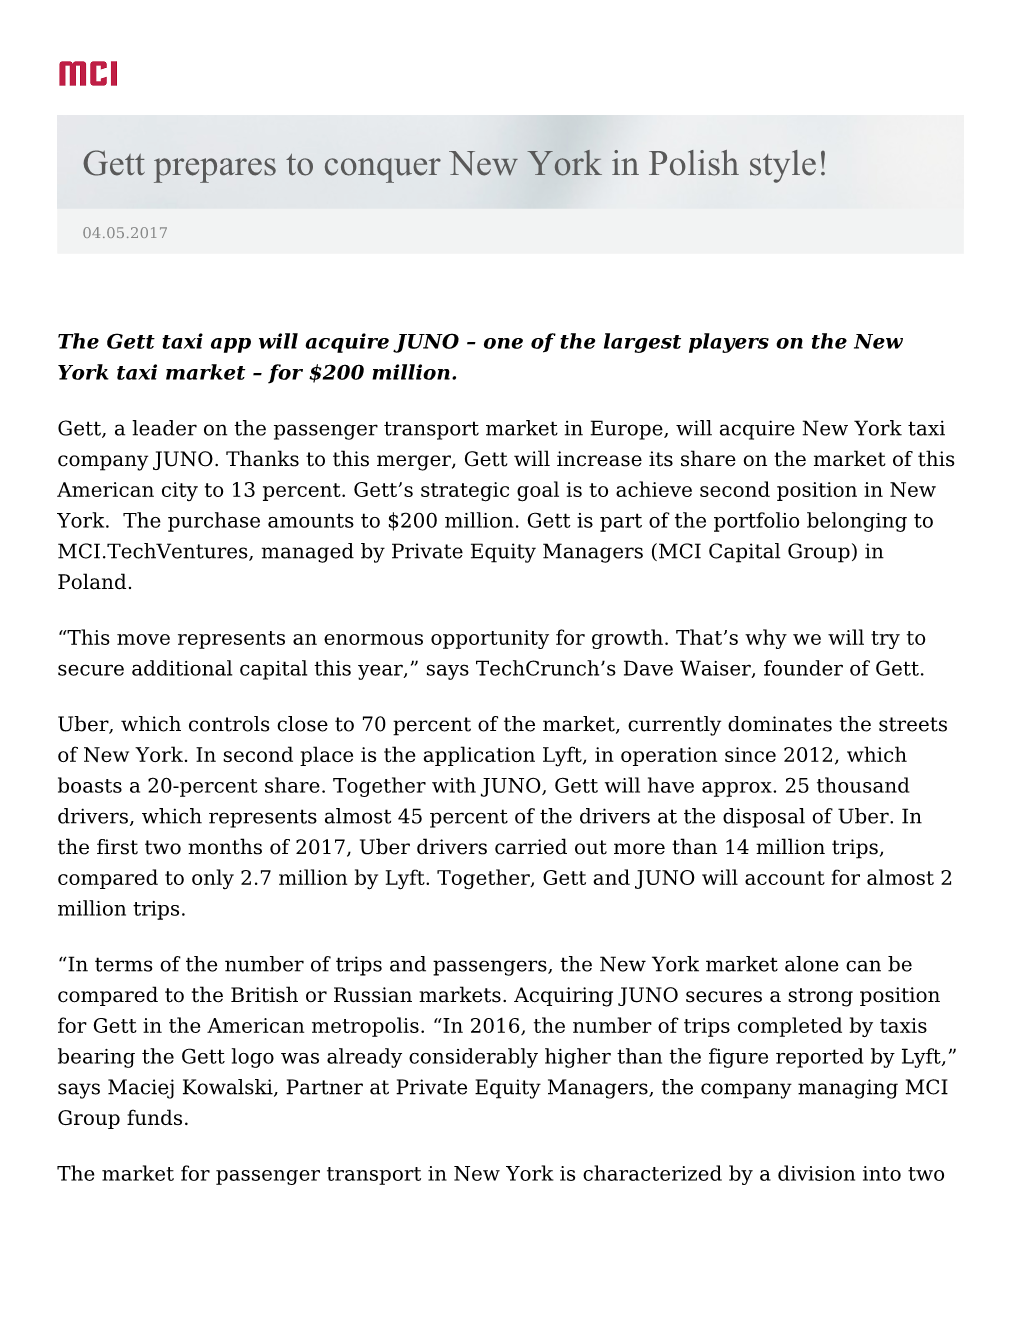 Gett Prepares to Conquer New York in Polish Style!